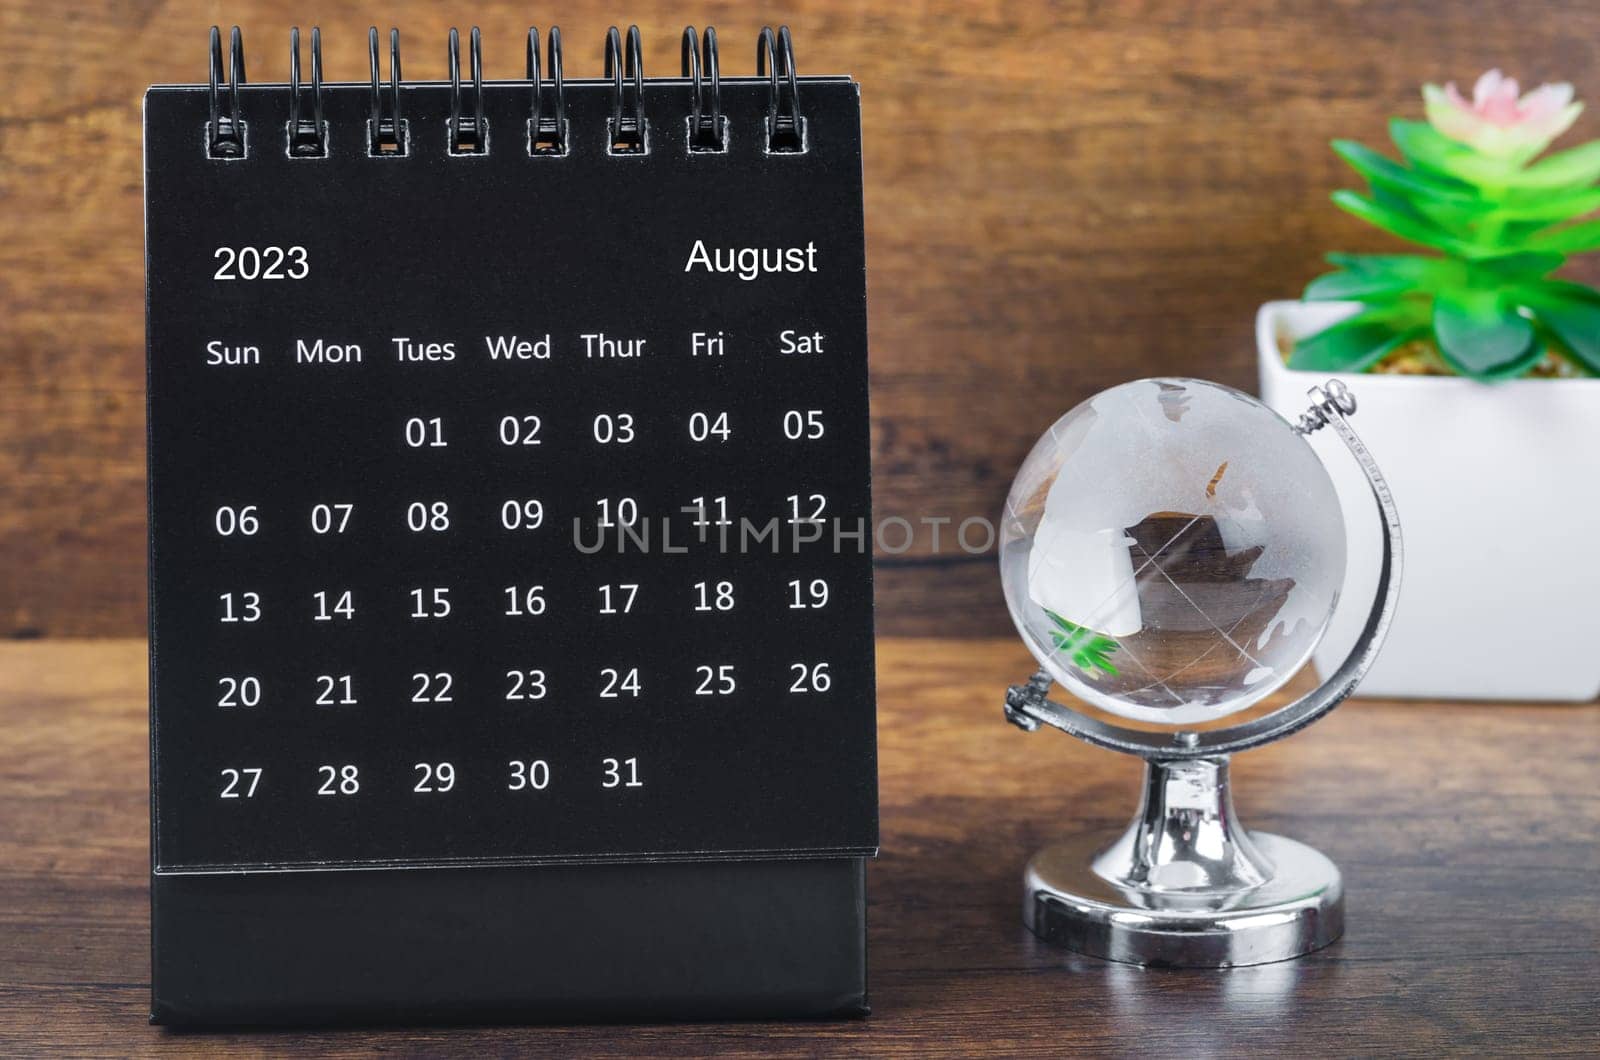 August 2023 desk calendar for 2023 year Black color with a crystal globe against a wooden table background.